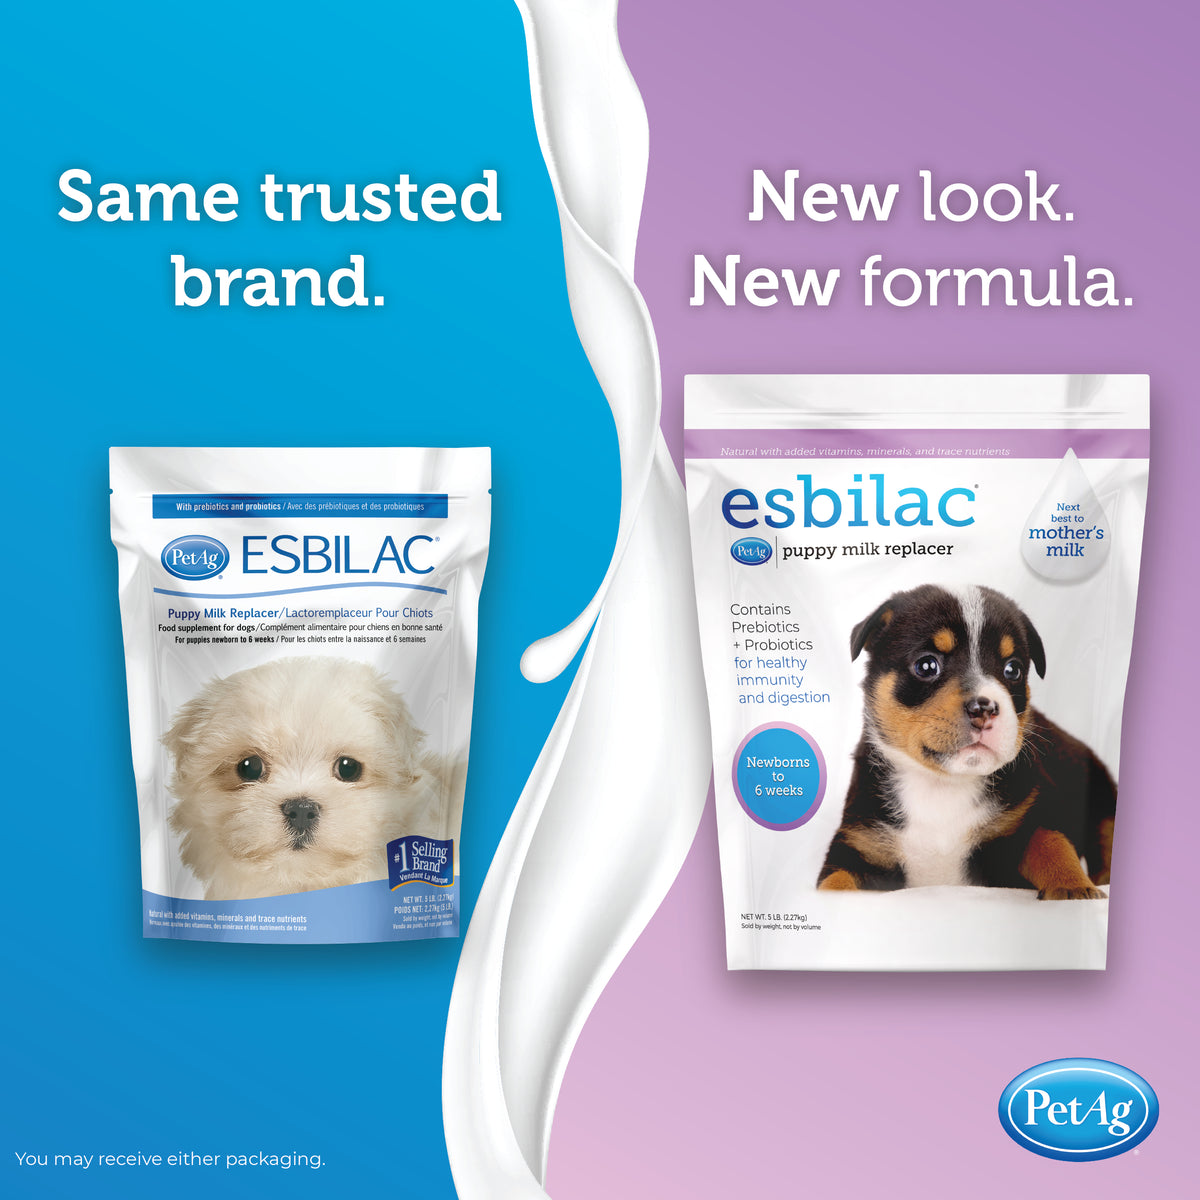 Esbilac Puppy Milk Replacer by PetAg